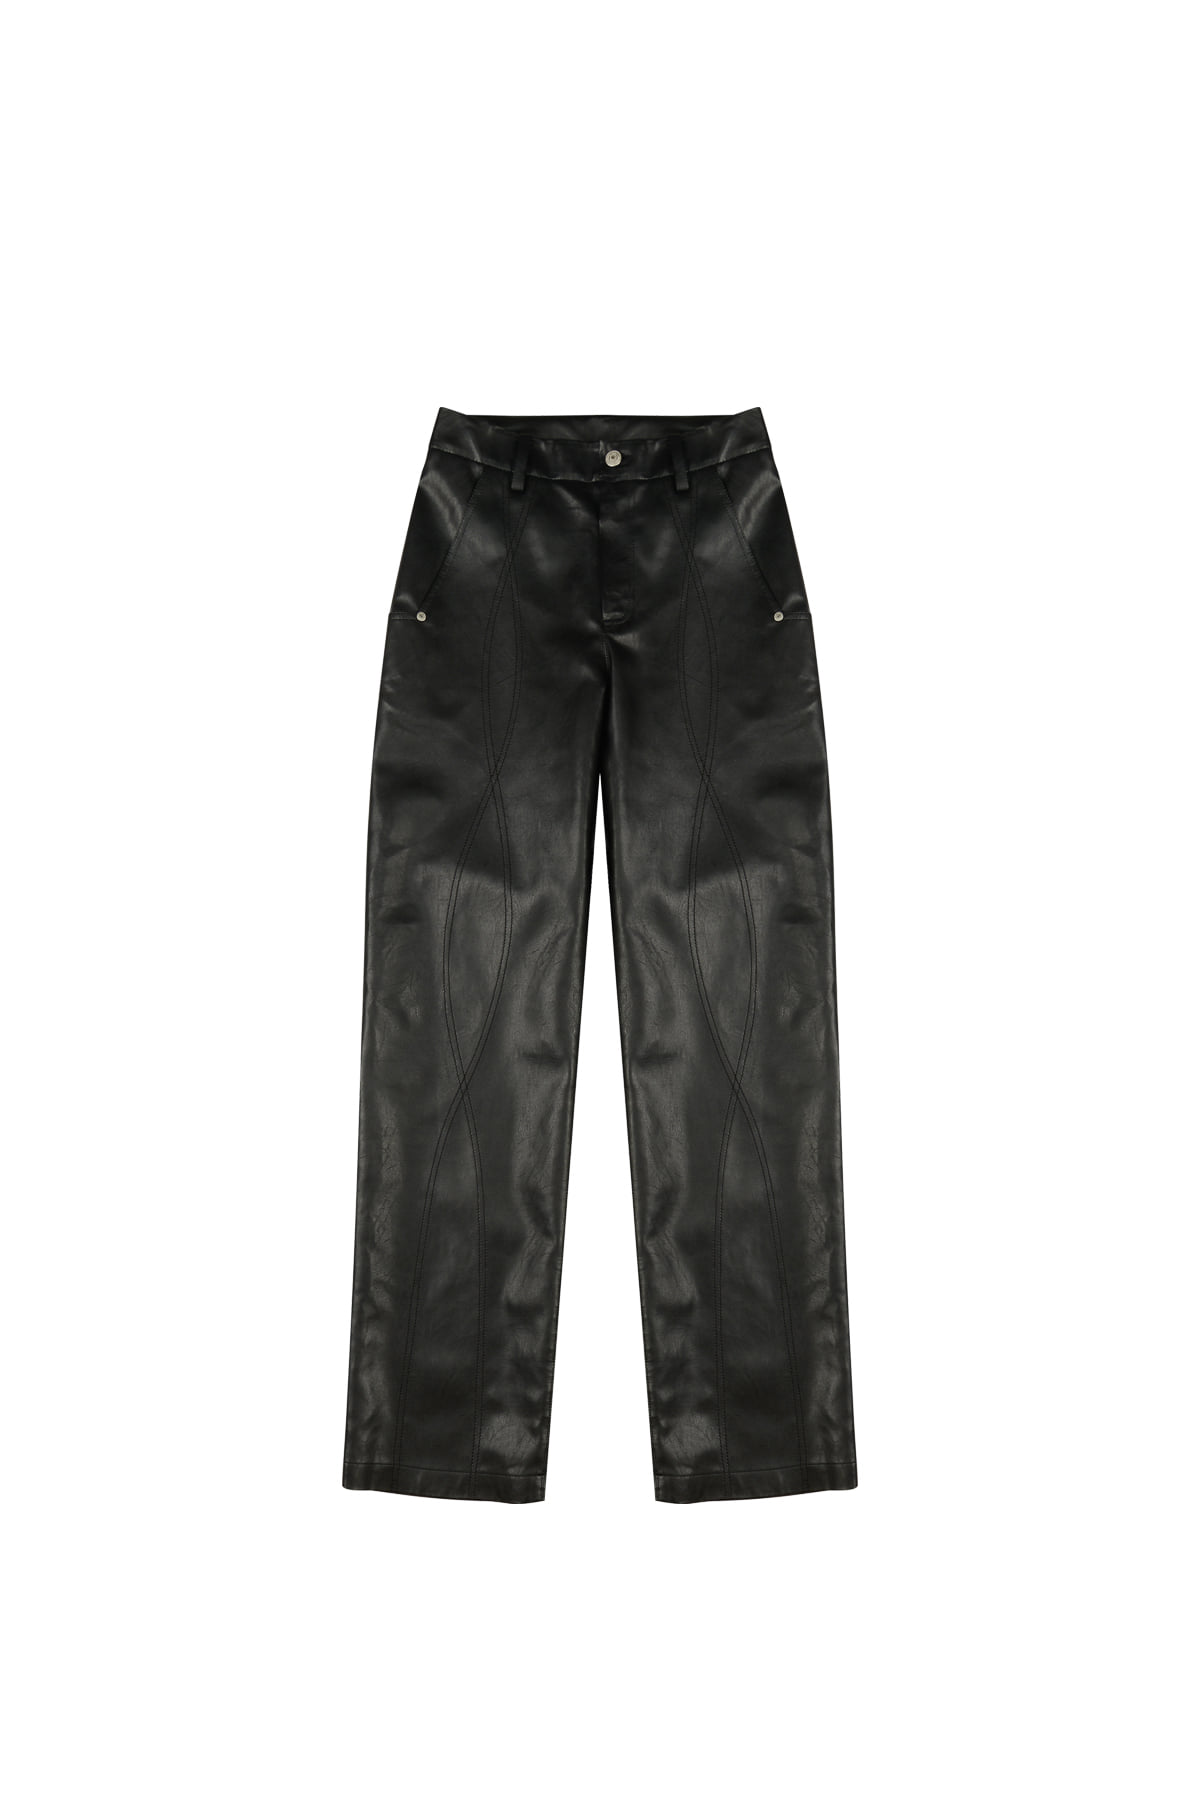 WAVE STITCH LEATHER PANTS IN BLACK